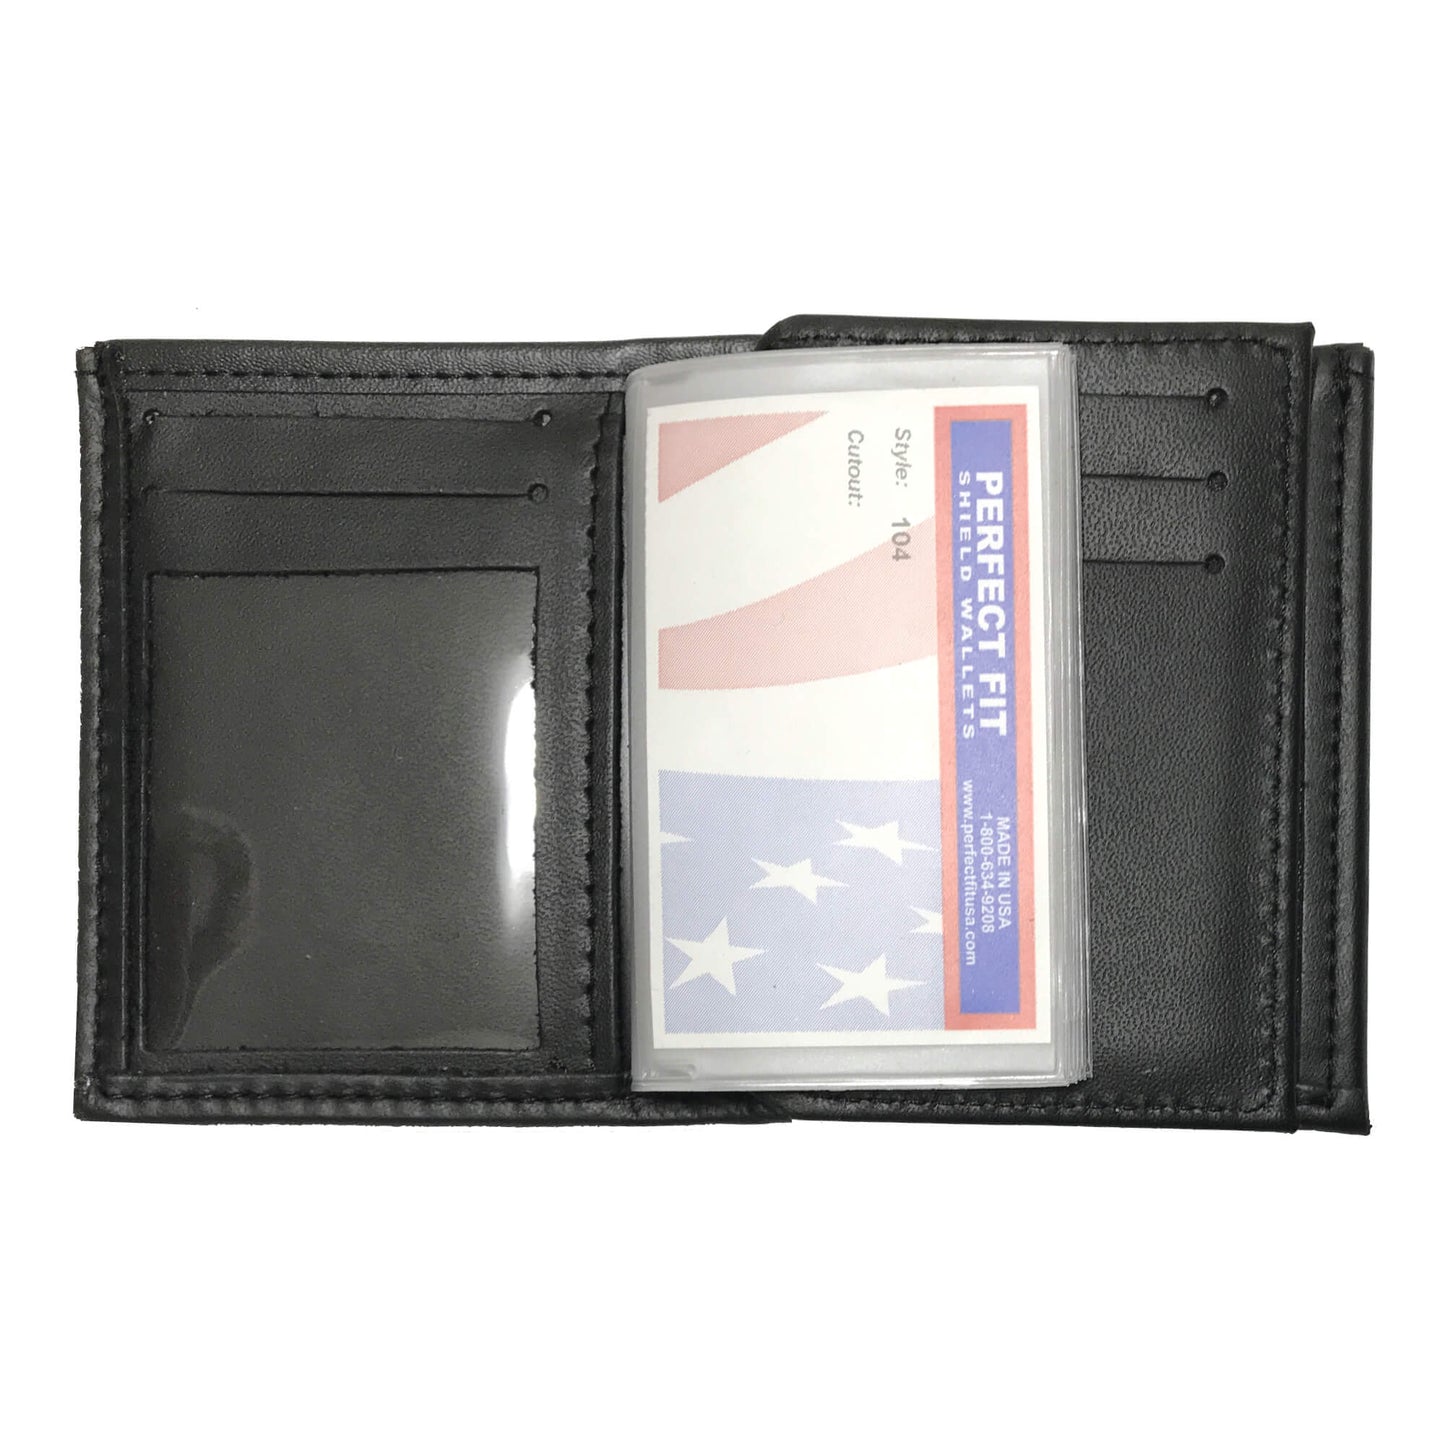 U.S. Department of Homeland Security - DHS (2.5in) Bifold Hidden Badge Wallet-Perfect Fit-911 Duty Gear USA